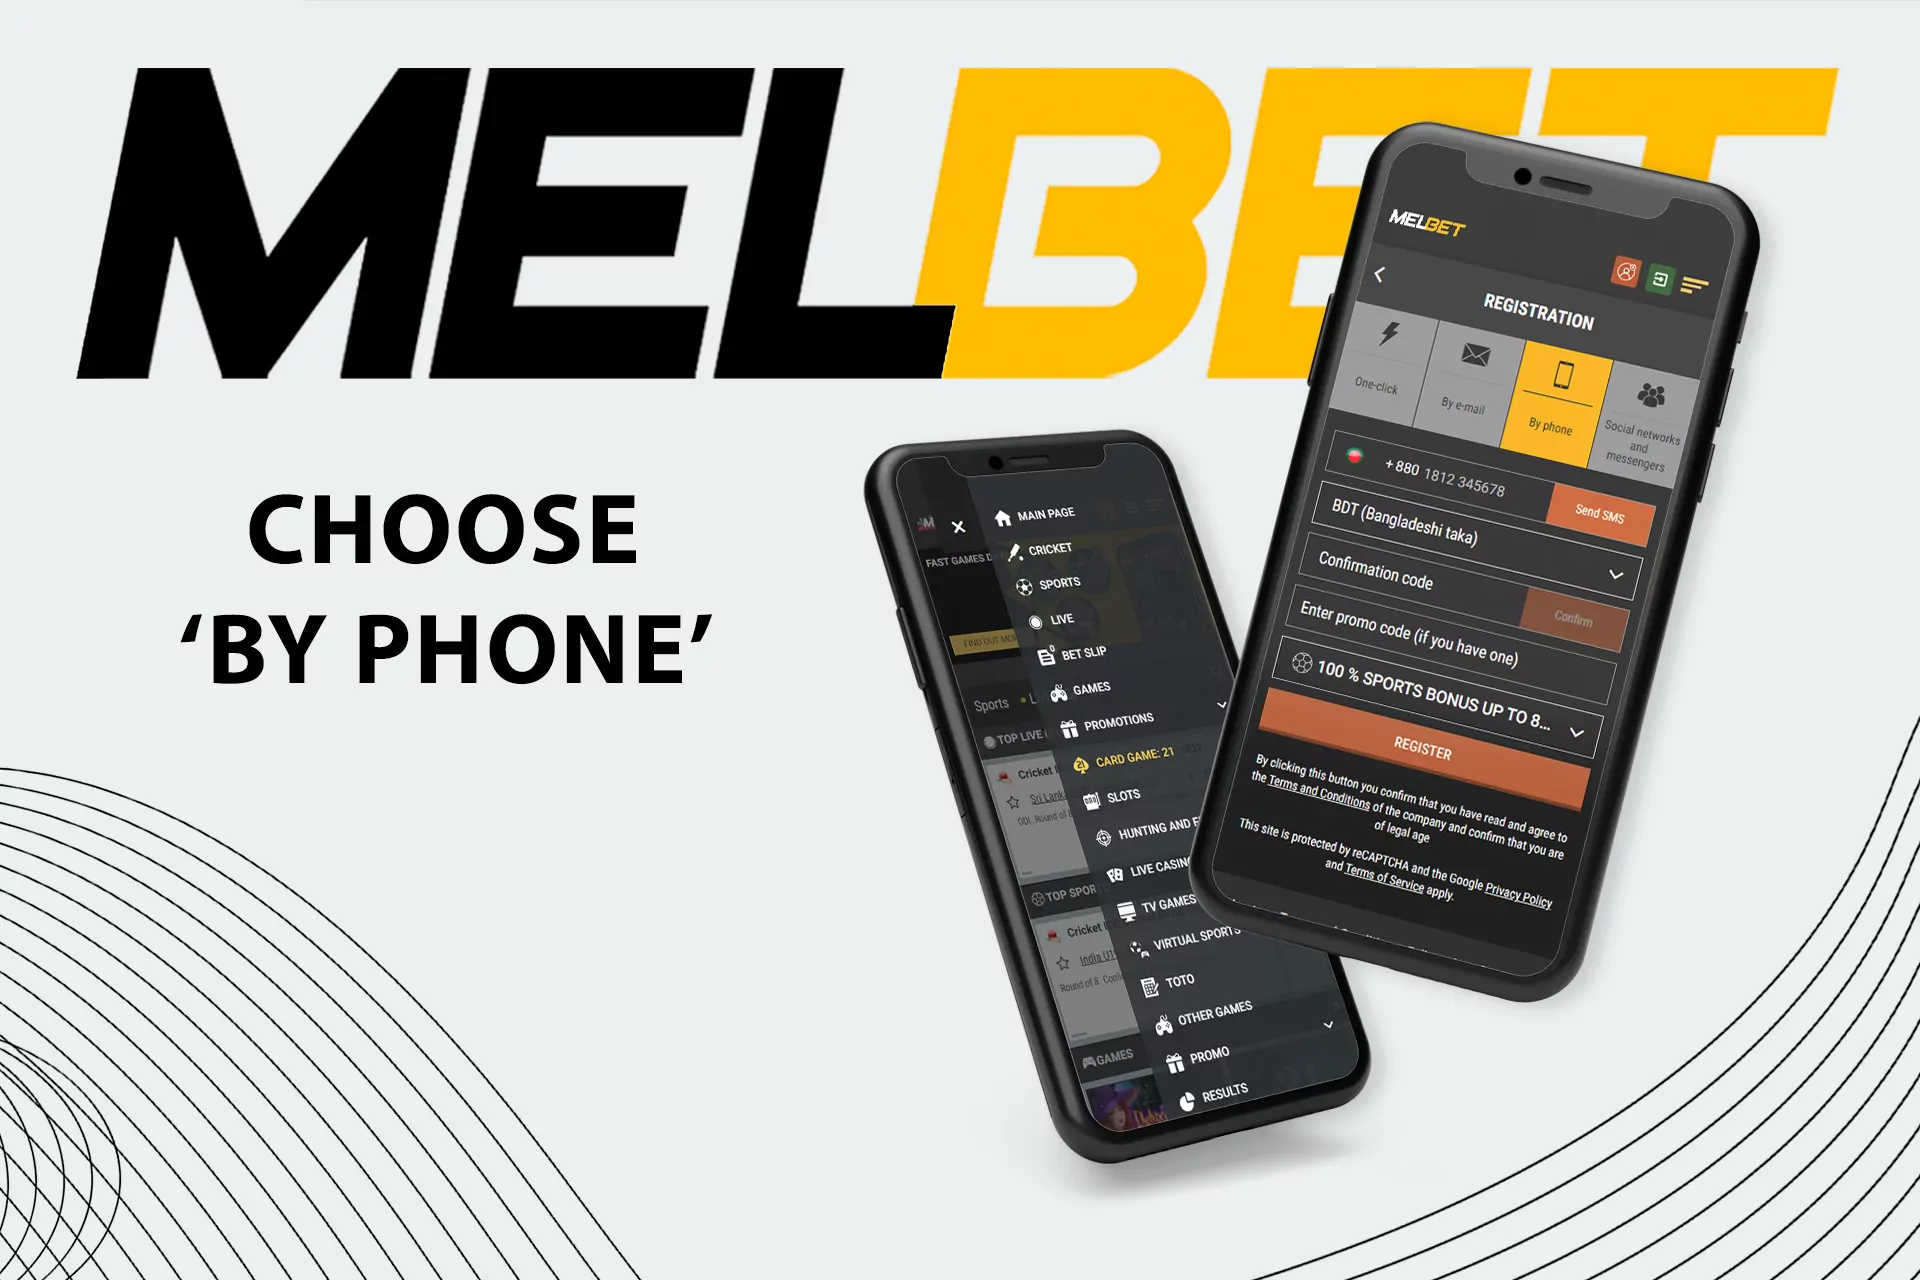 Choose the phone number method to create a new Melbet account.